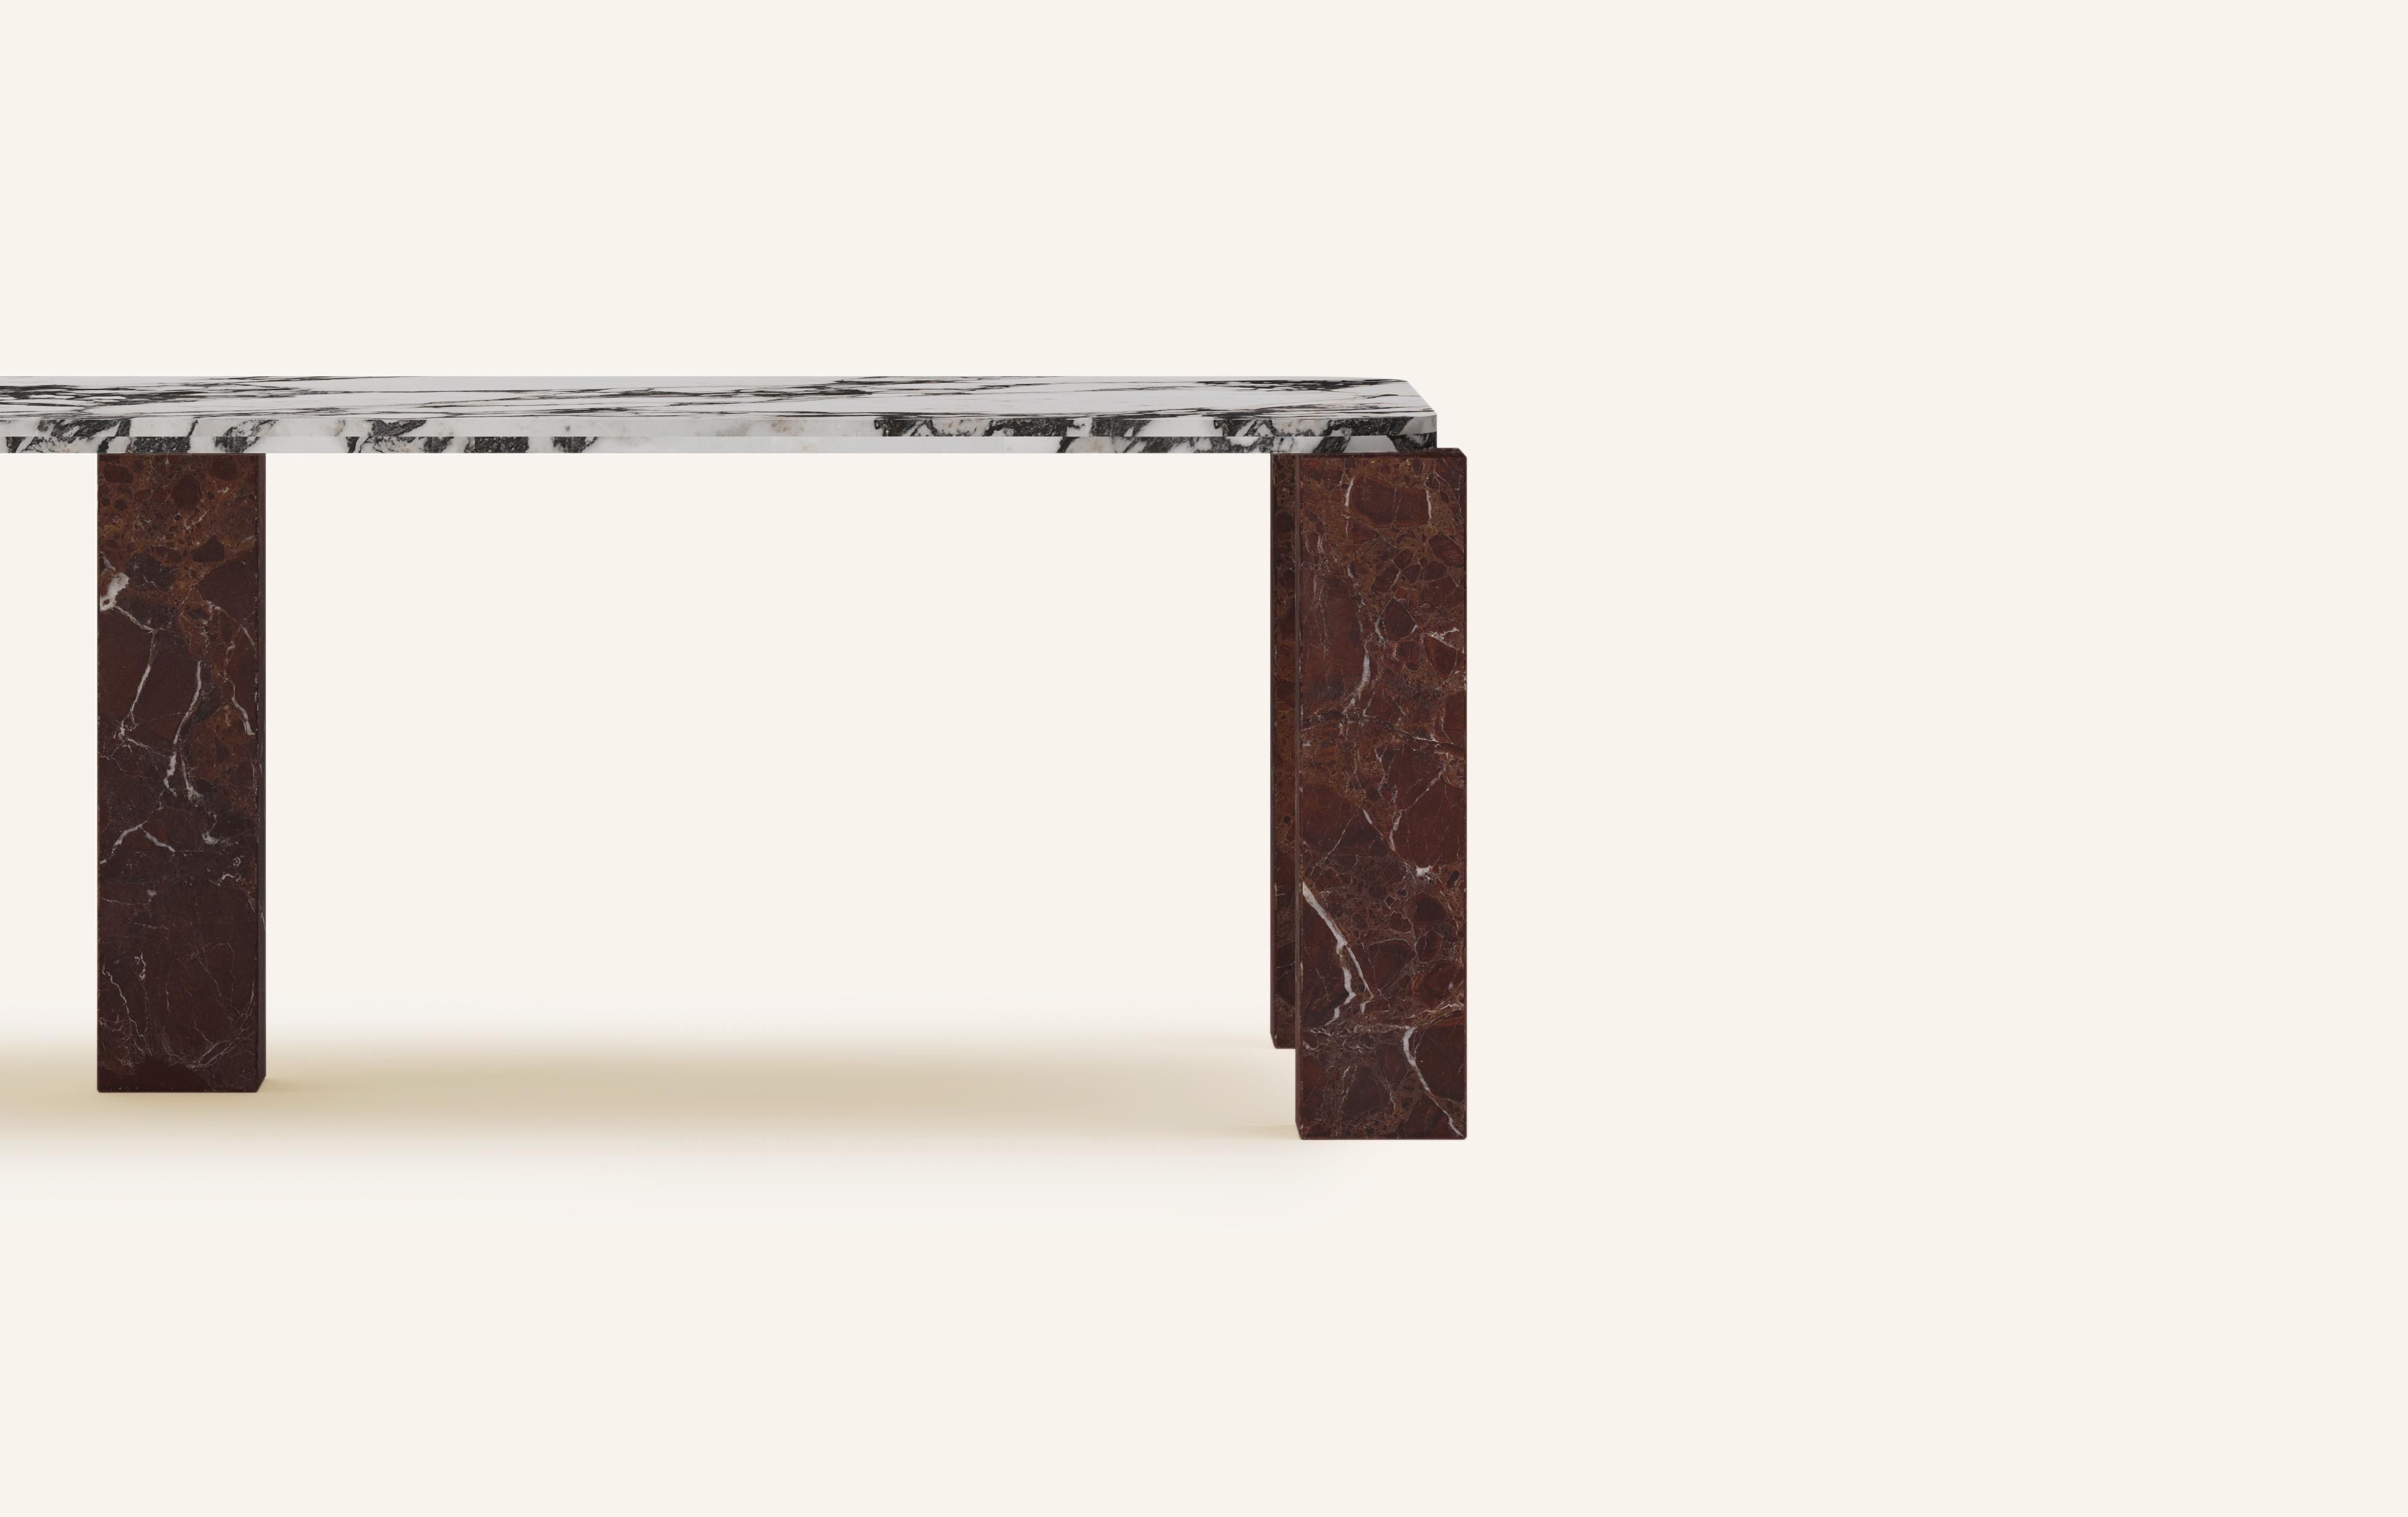 American FORM(LA) Cubo Rectangle Dining Table 86”L x 44”W x 30”H Viola & Rosso Marble For Sale